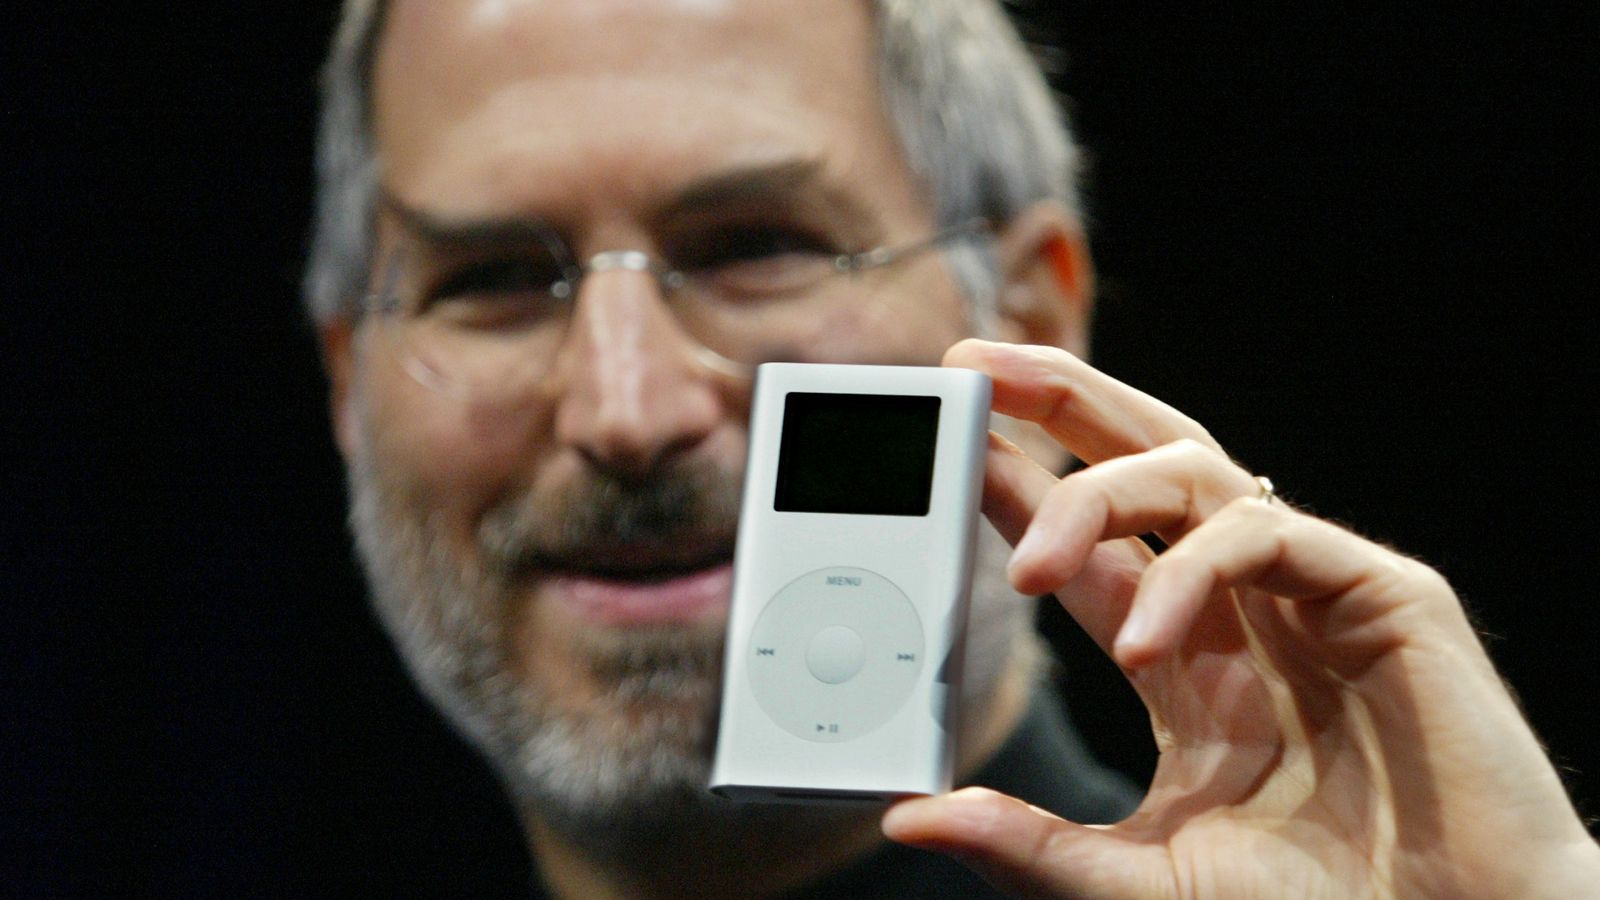 Apple discontinues iPod, 20 years after it was released